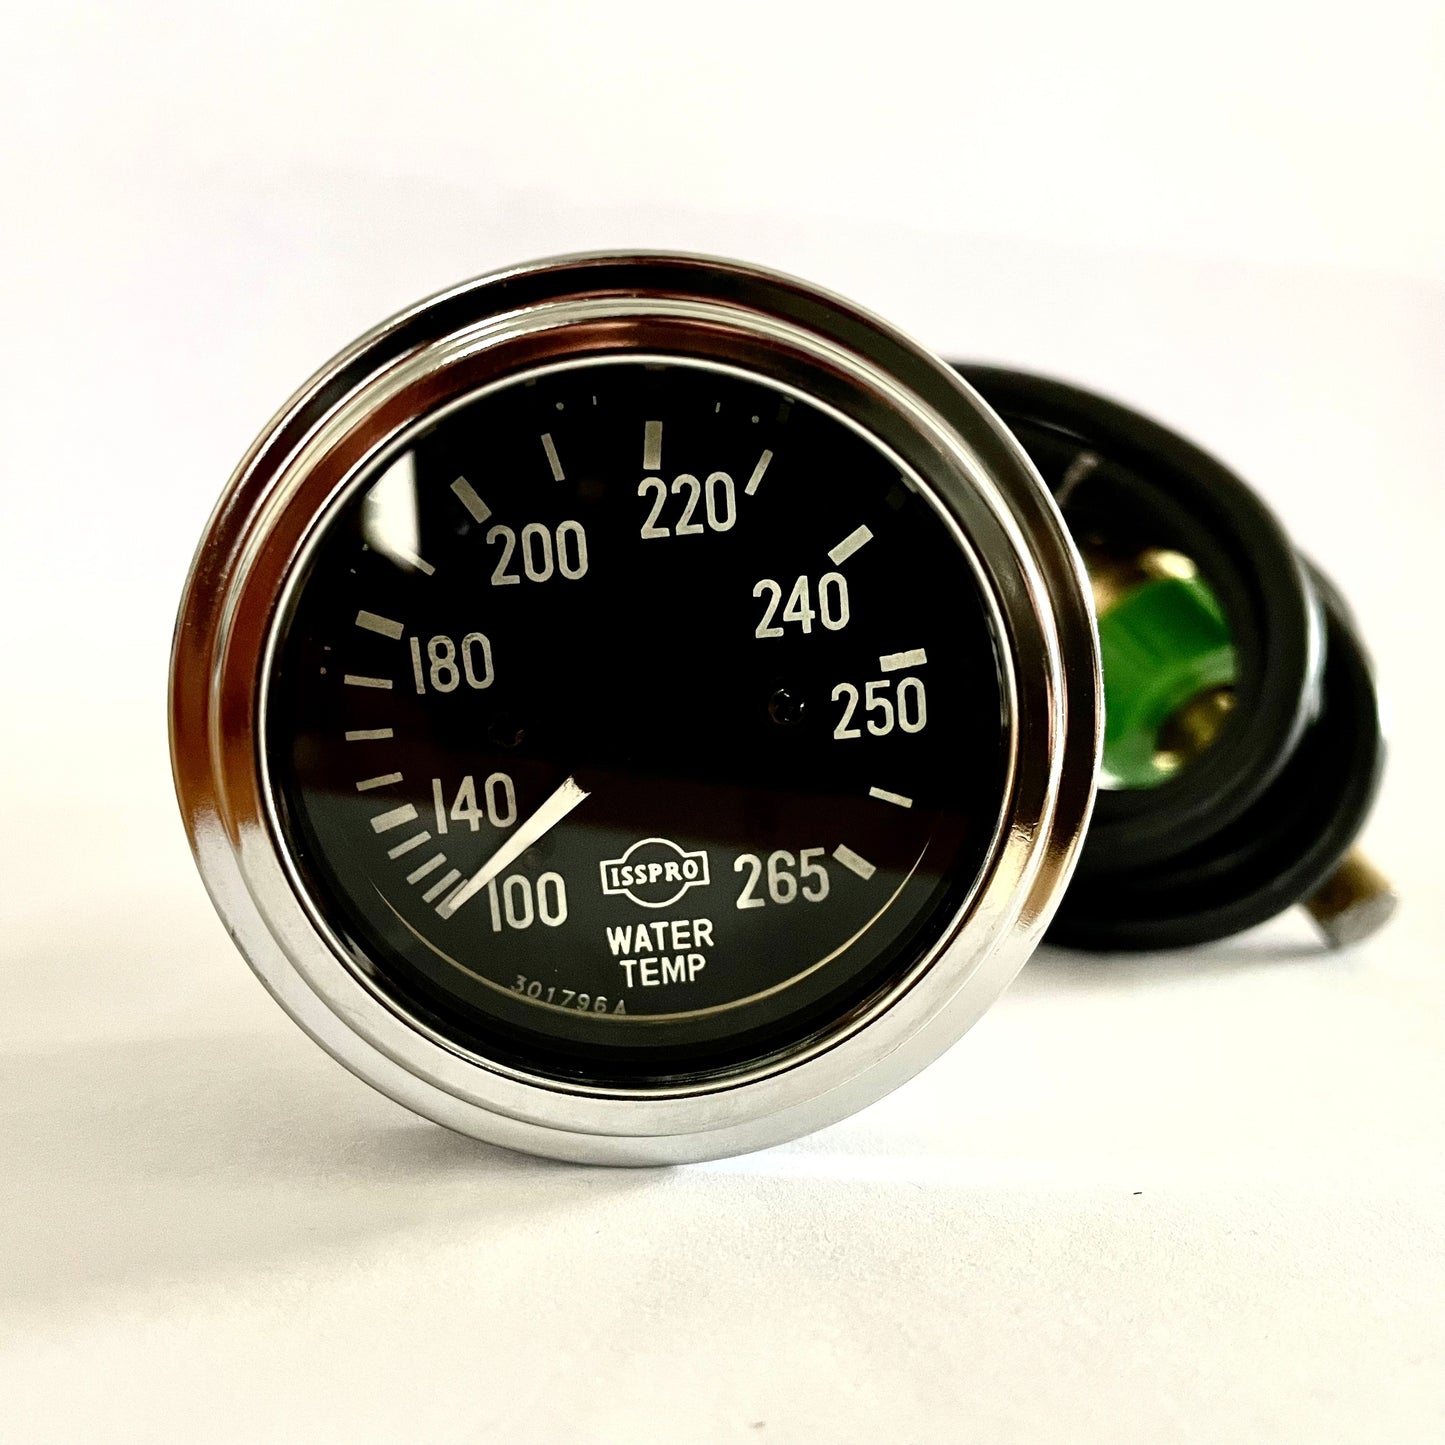 Mechanical Water Temperature Gauge 100-265 F Chrome  [ISSPRO] [R8733]